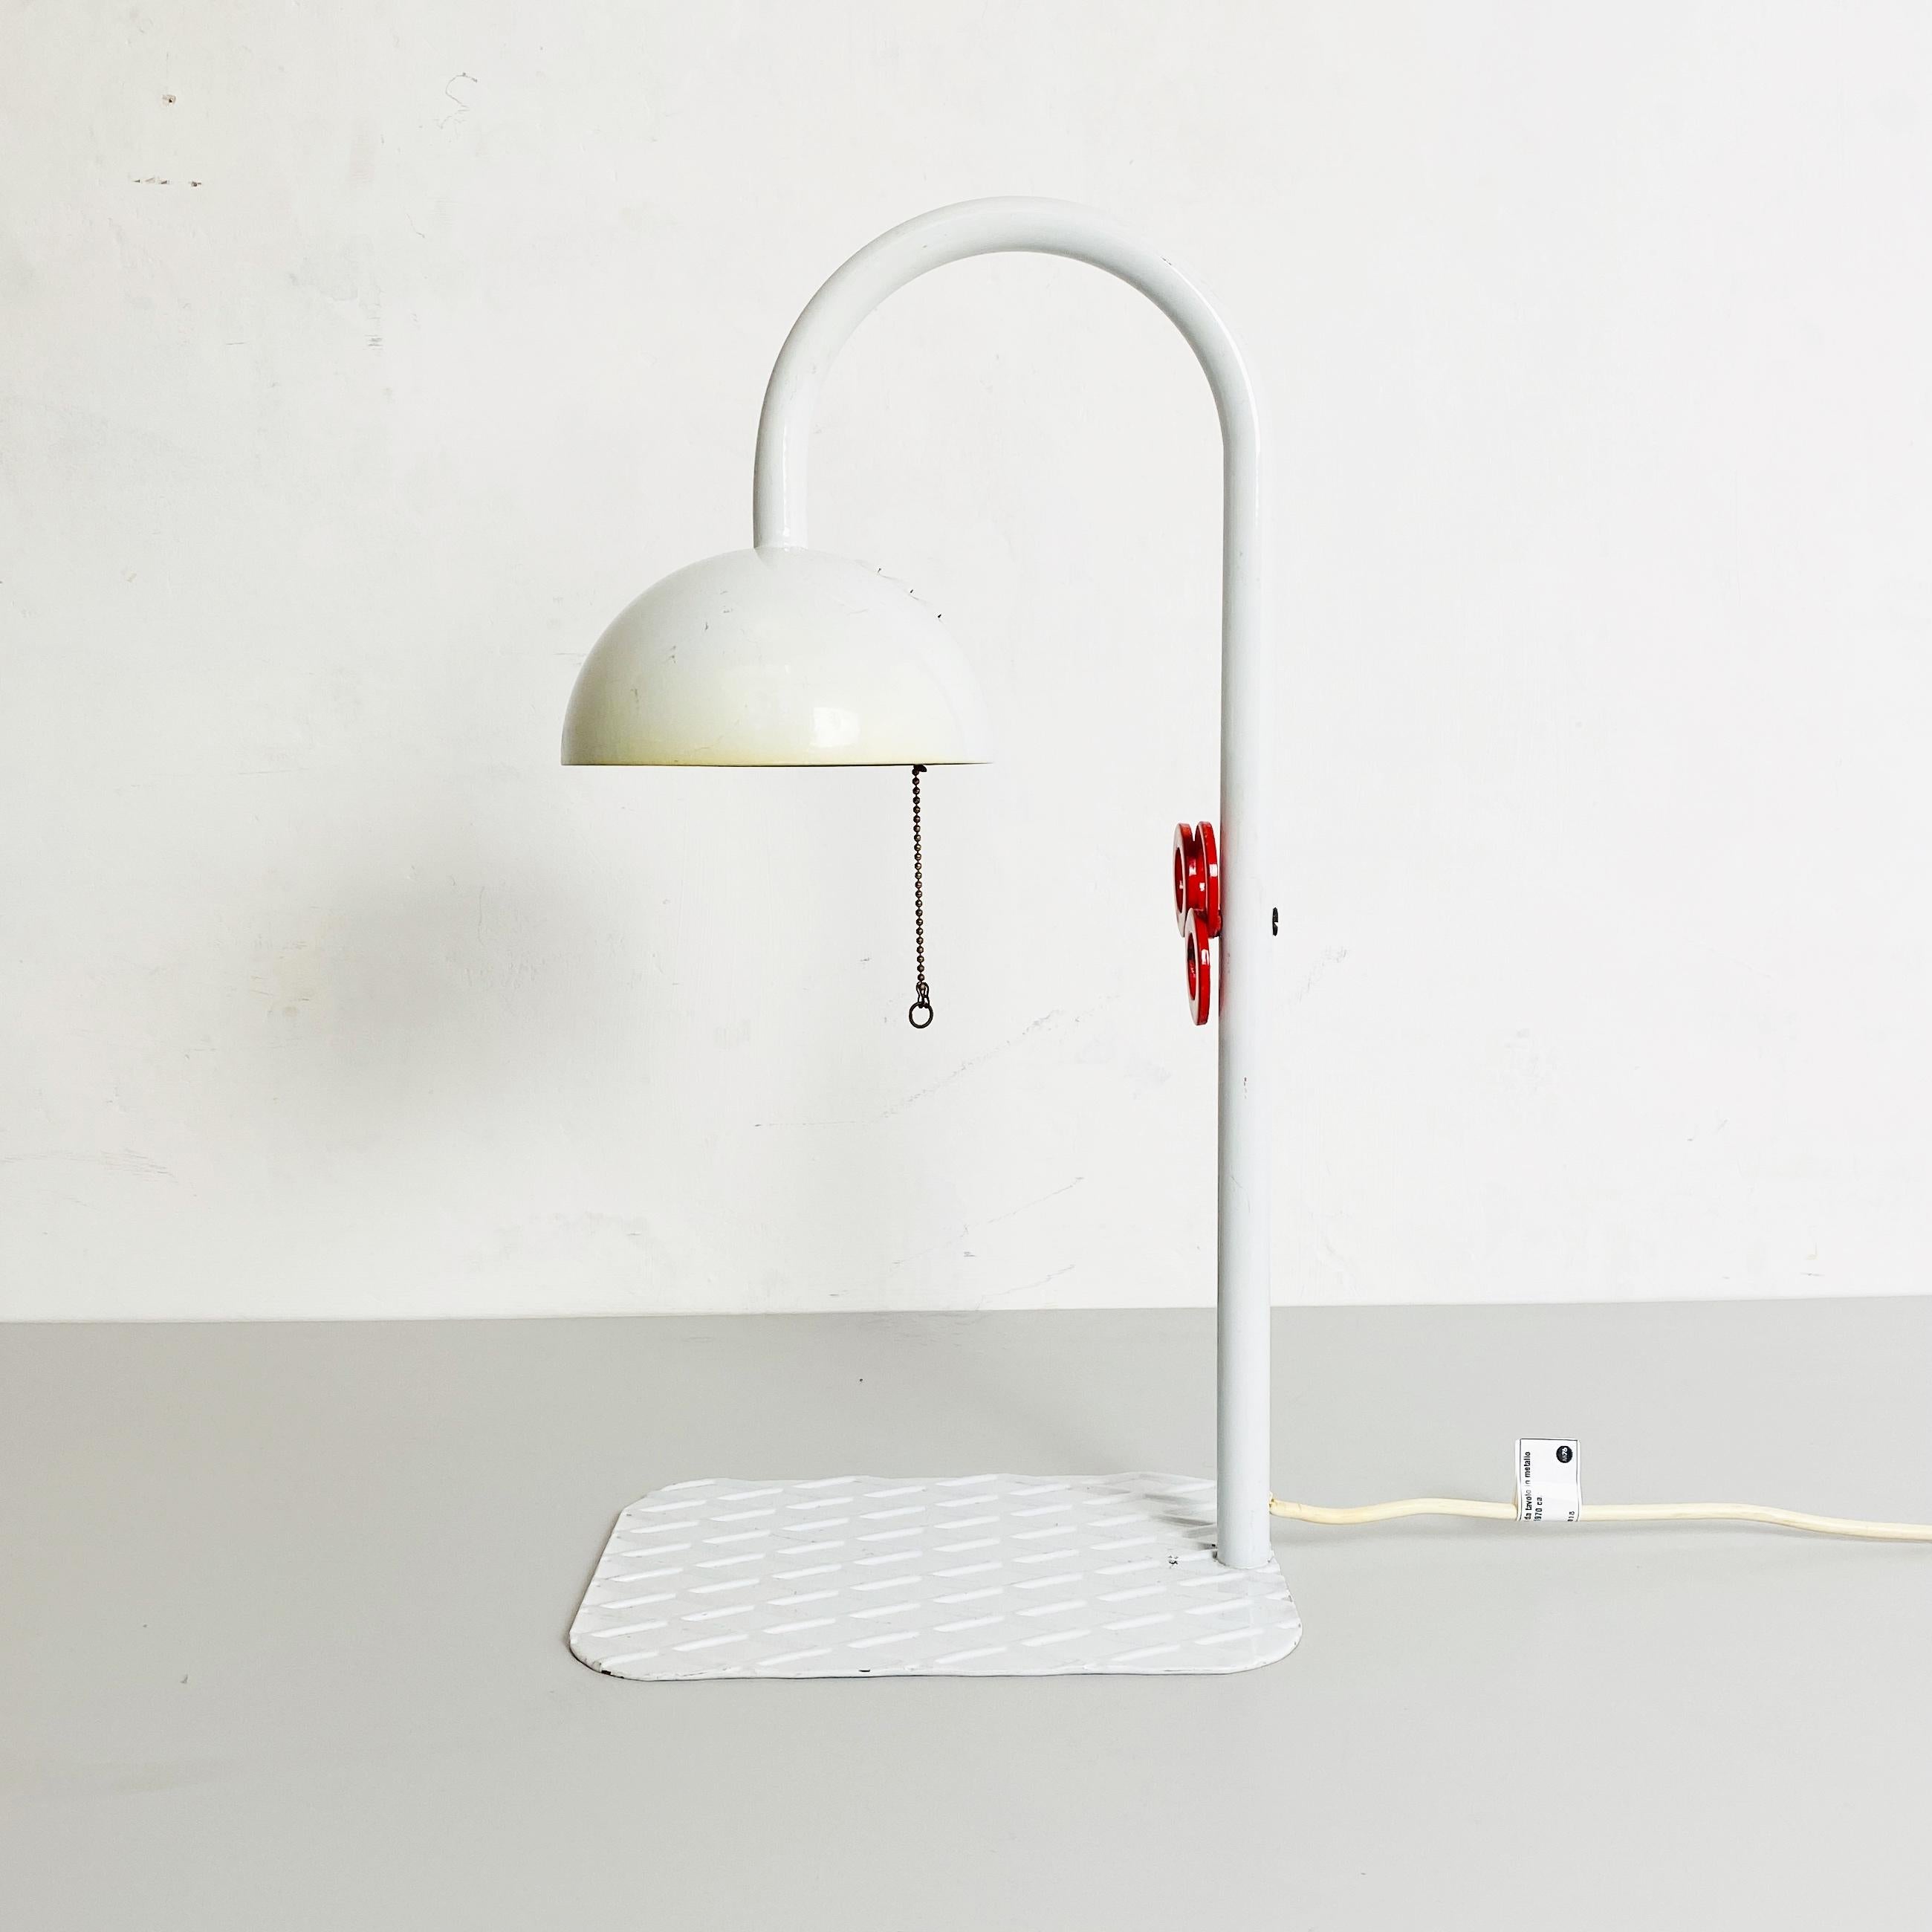 White metal table lamp by L'isola che non c'è, 1980s
White metal table lamp with red knob on the handle, flat metal base with diamond pattern and white lampshade with red perforated metal closure and chain switch. Produced by the italian company